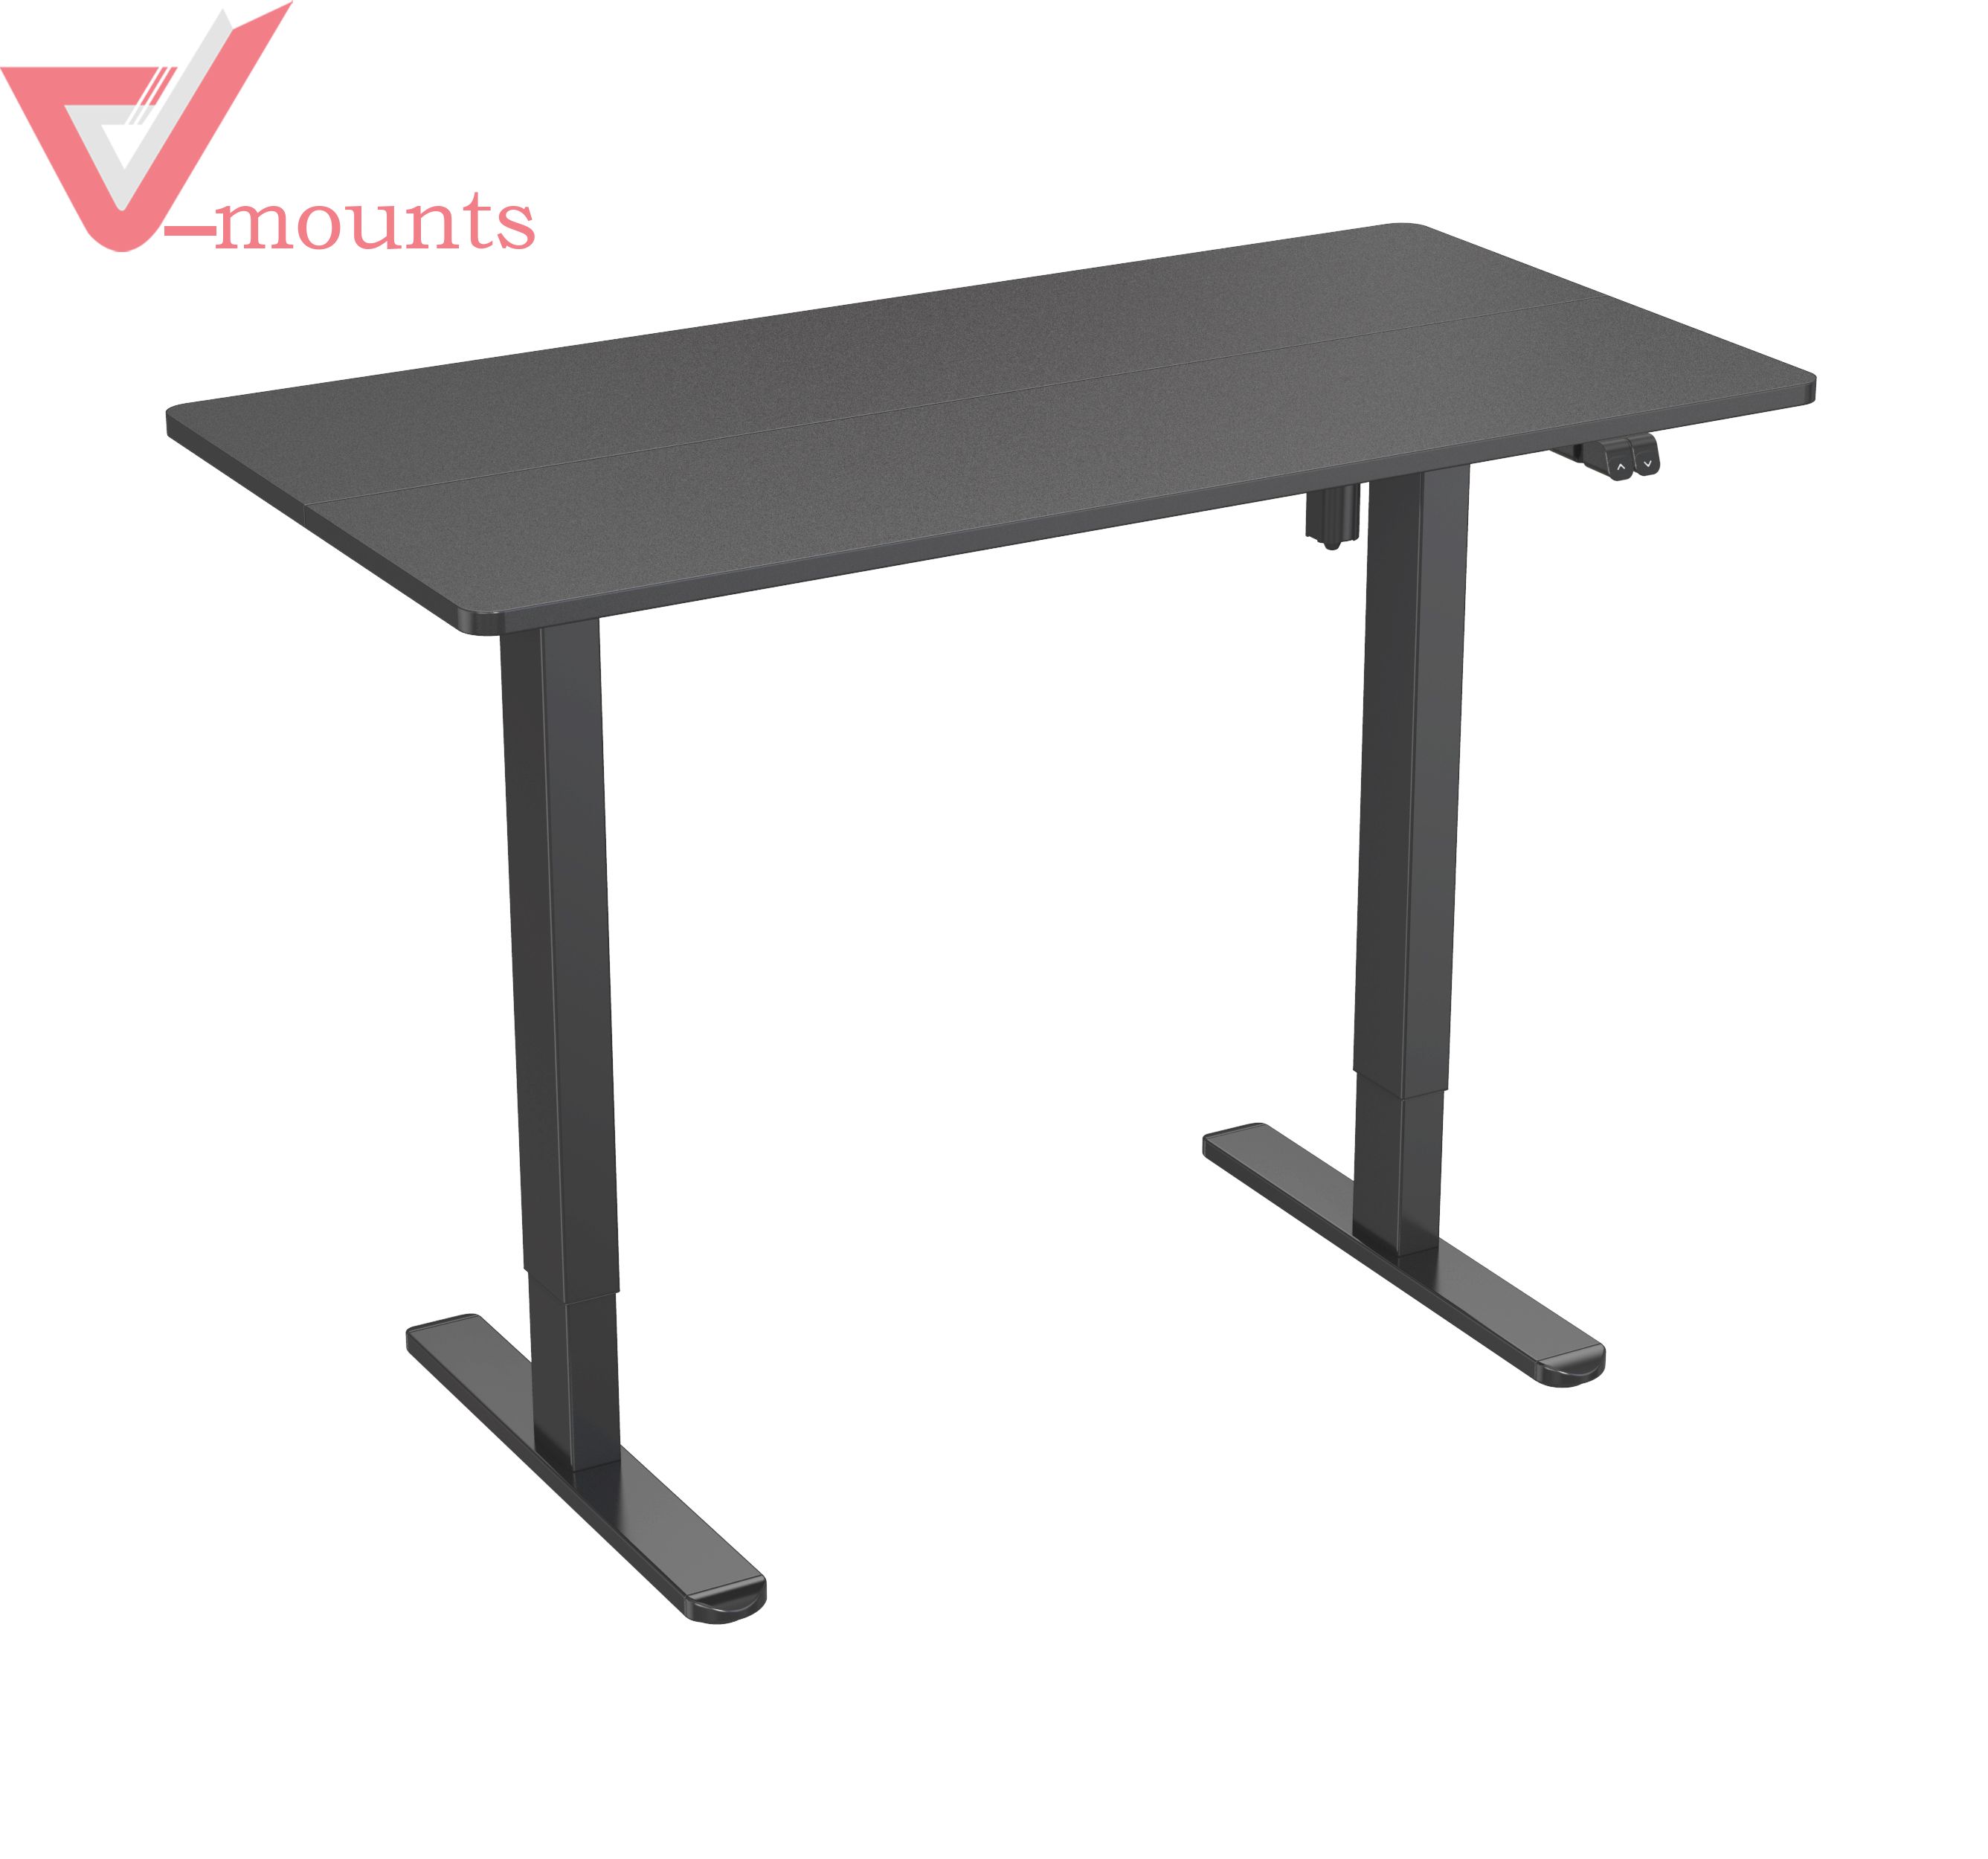 V-mounts Electric Single Motor Height Adjustable Standing Desks With 2 Spliced Boards And Rectangular Legs VM-JSD5-02-2P